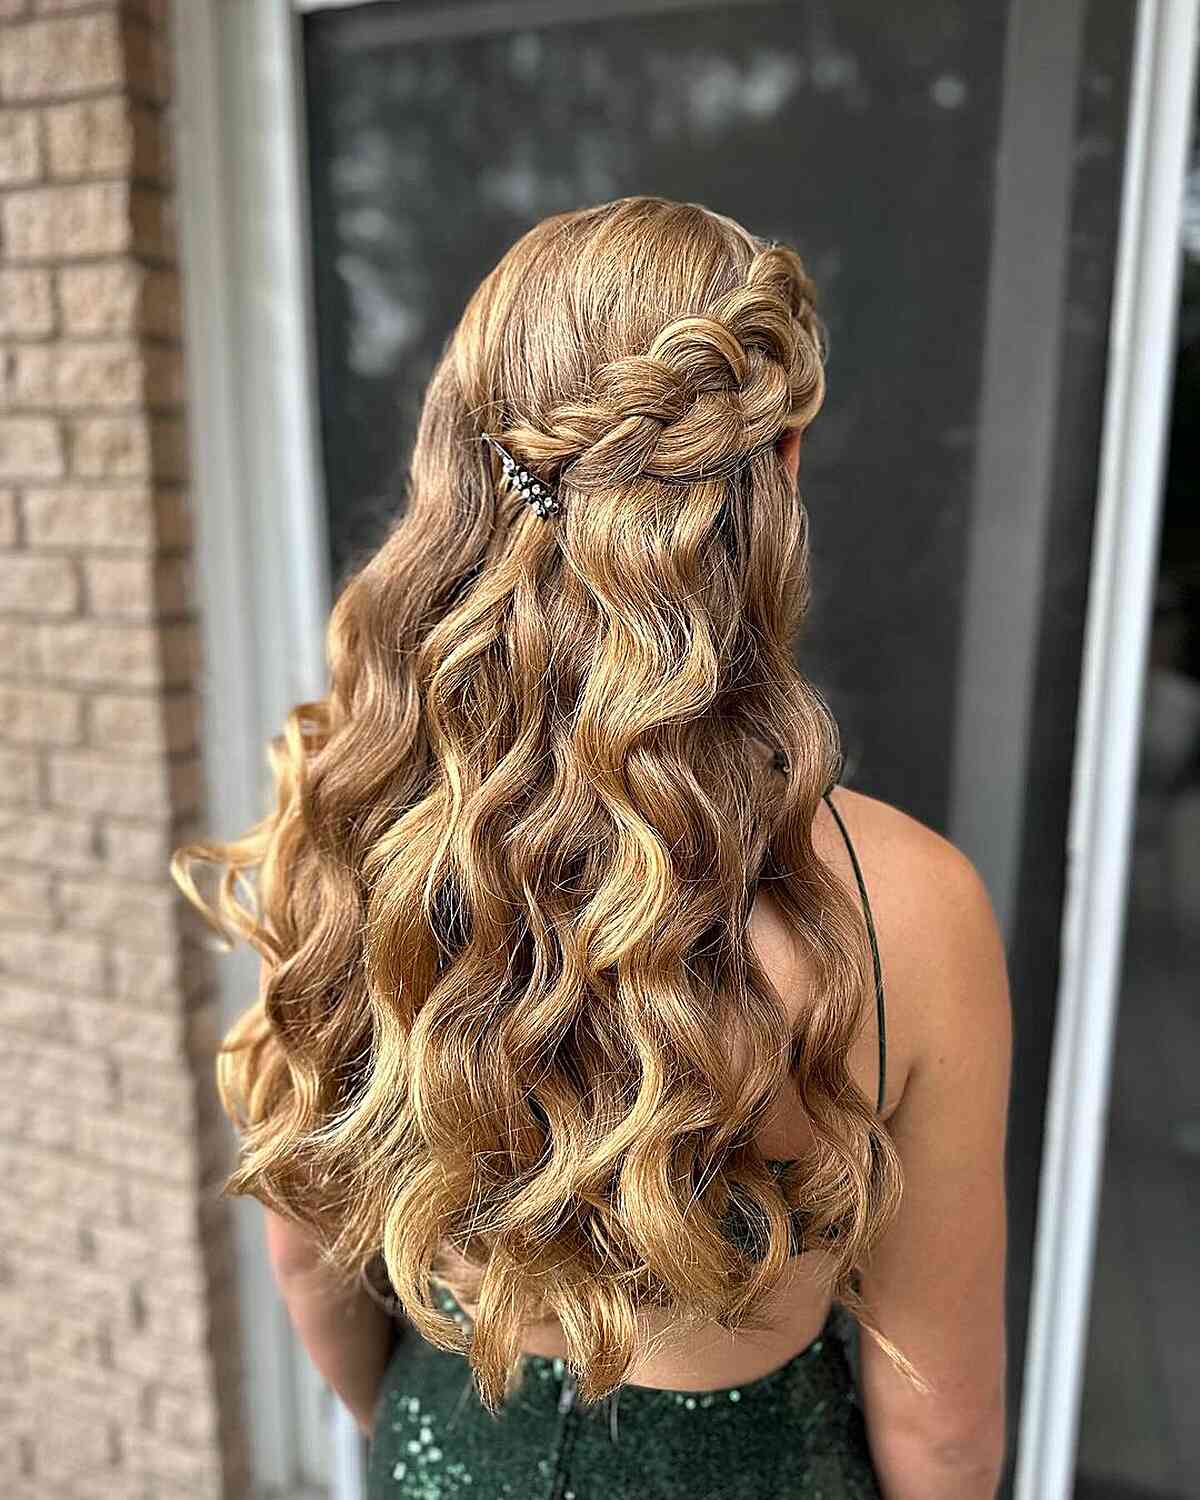 Half Braided Headband with Long-Length Loose Curls for Prom Night